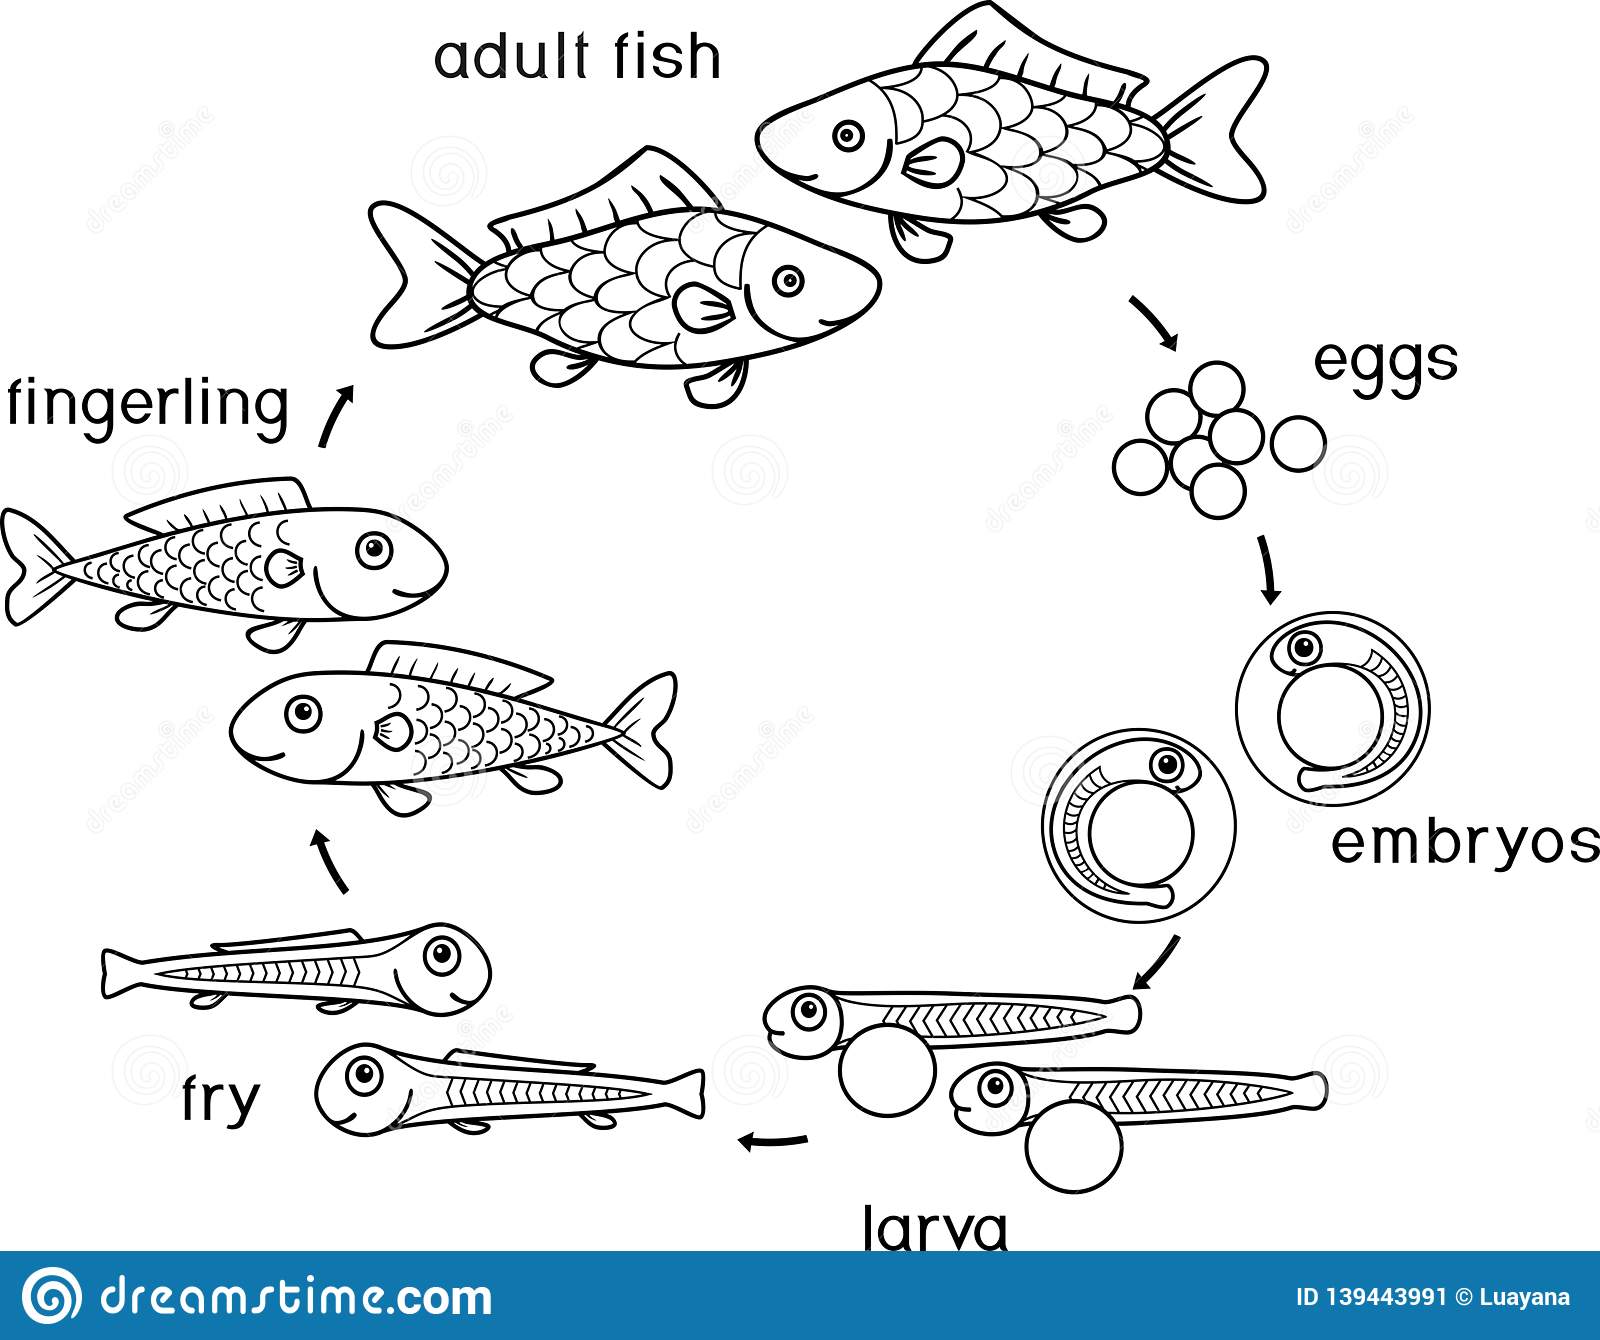 What are the stages of fish development?